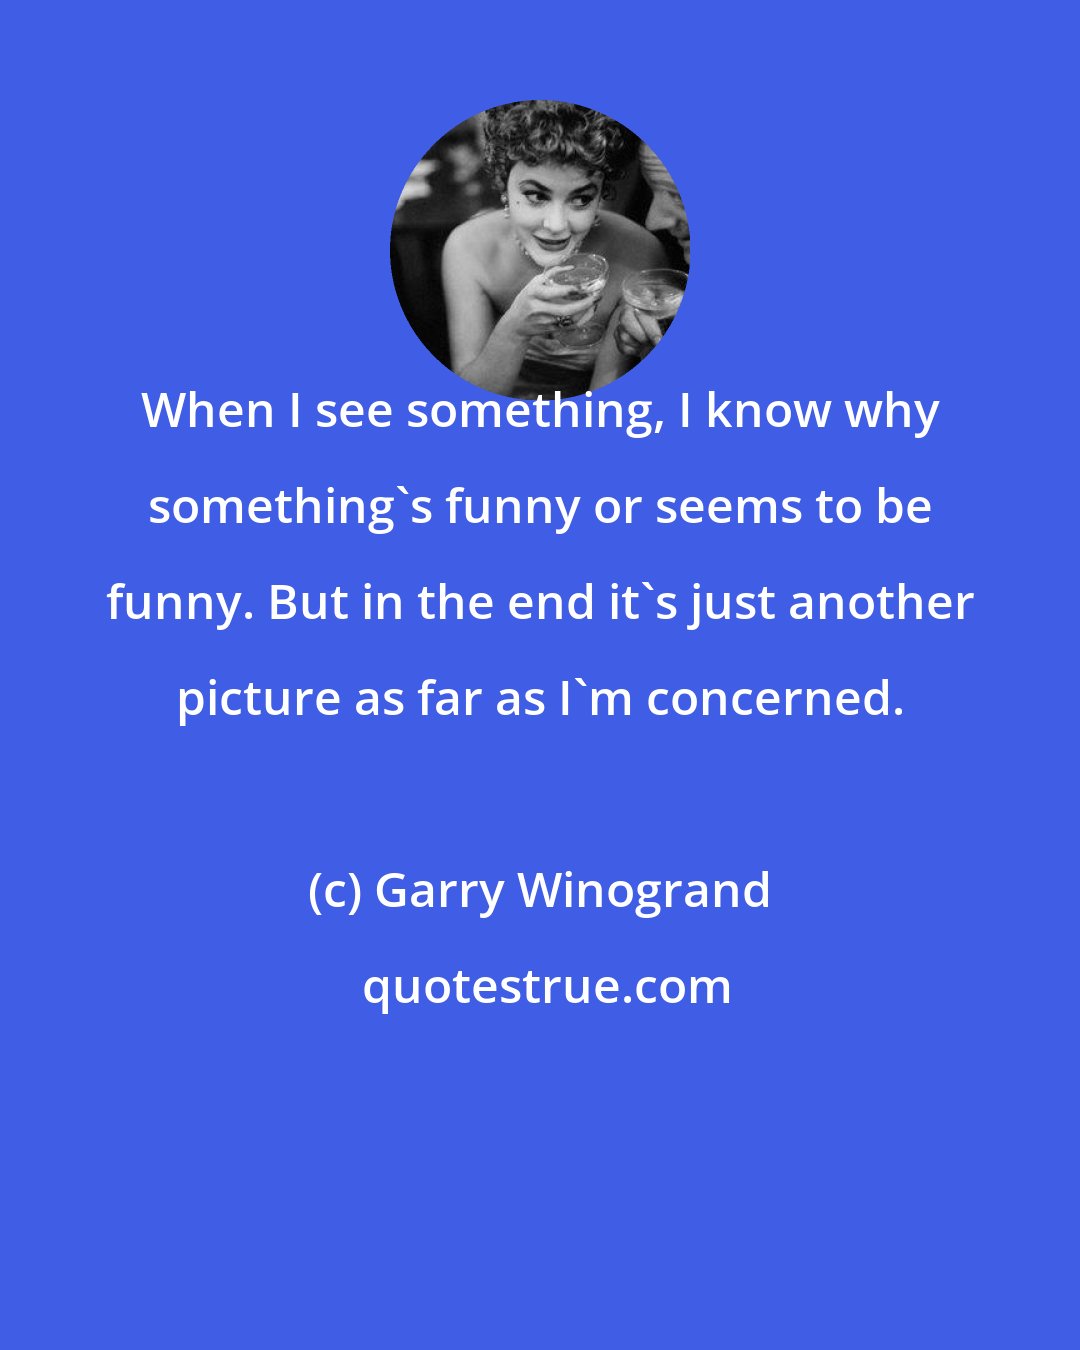 Garry Winogrand: When I see something, I know why something's funny or seems to be funny. But in the end it's just another picture as far as I'm concerned.